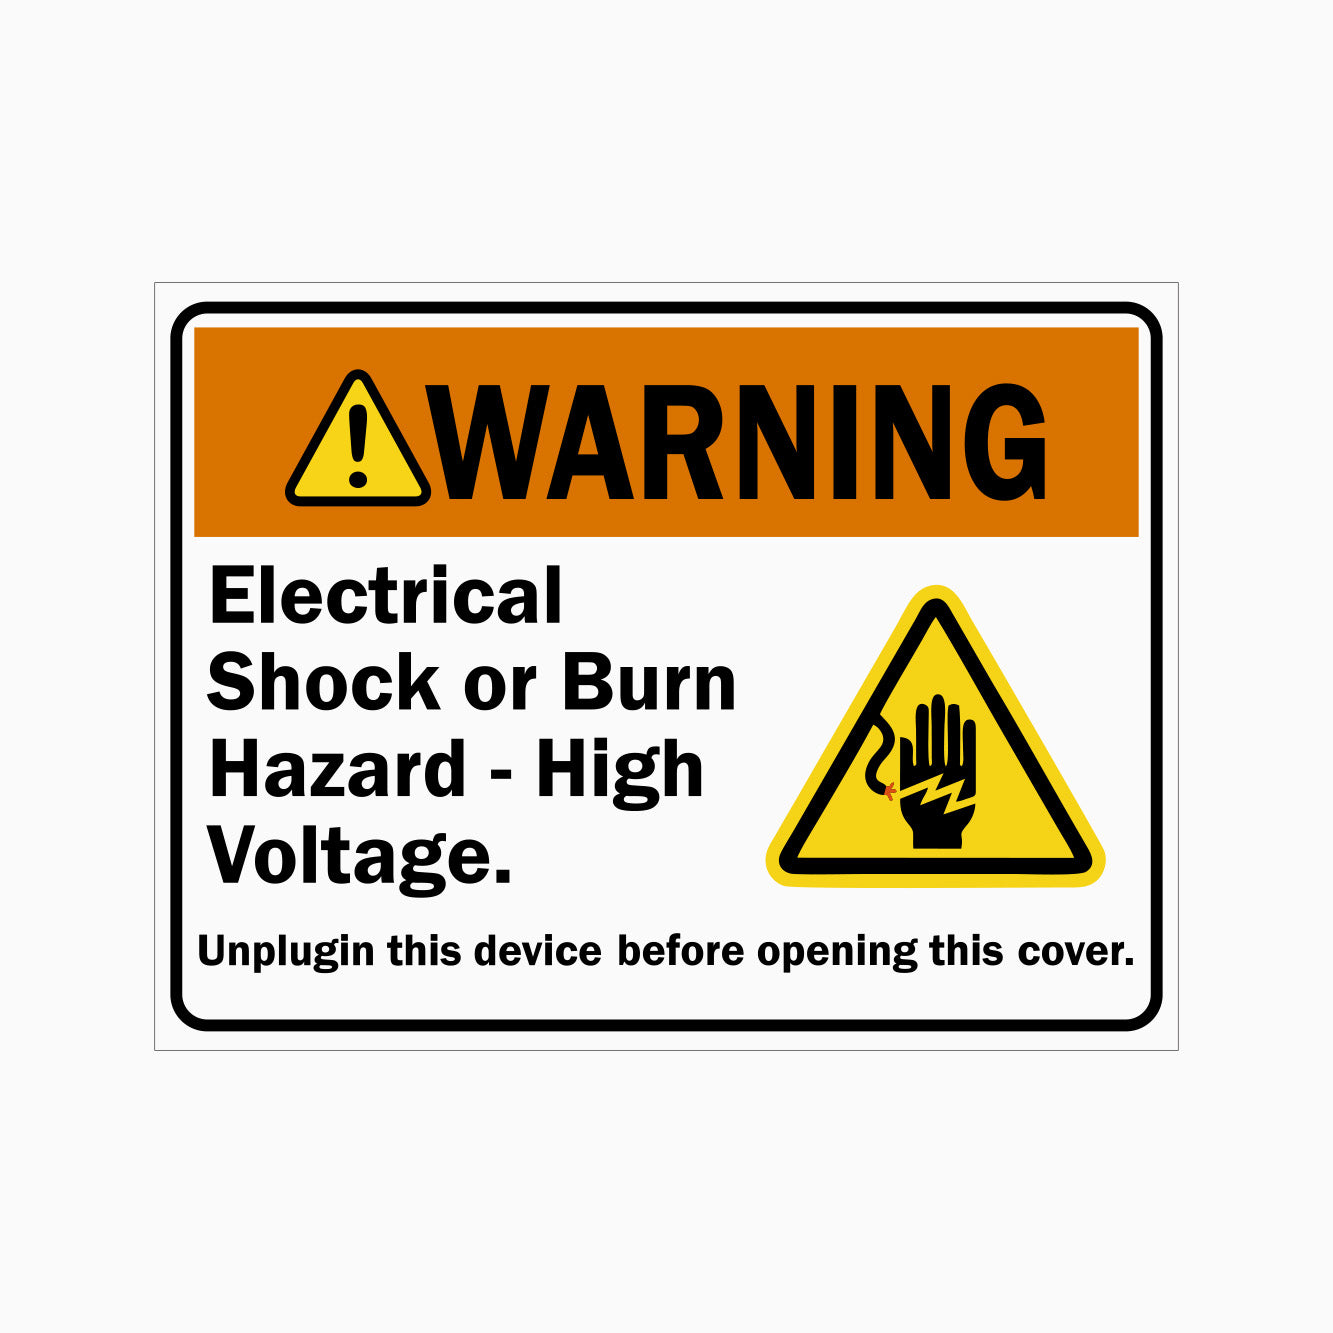 WARNING ELECTRICAL SHOCK OR BURN HAZARD HIGH VOLTAGE. UNPLUGING THIS DEVICE BEFORE OPENING THIS COVER SIGN